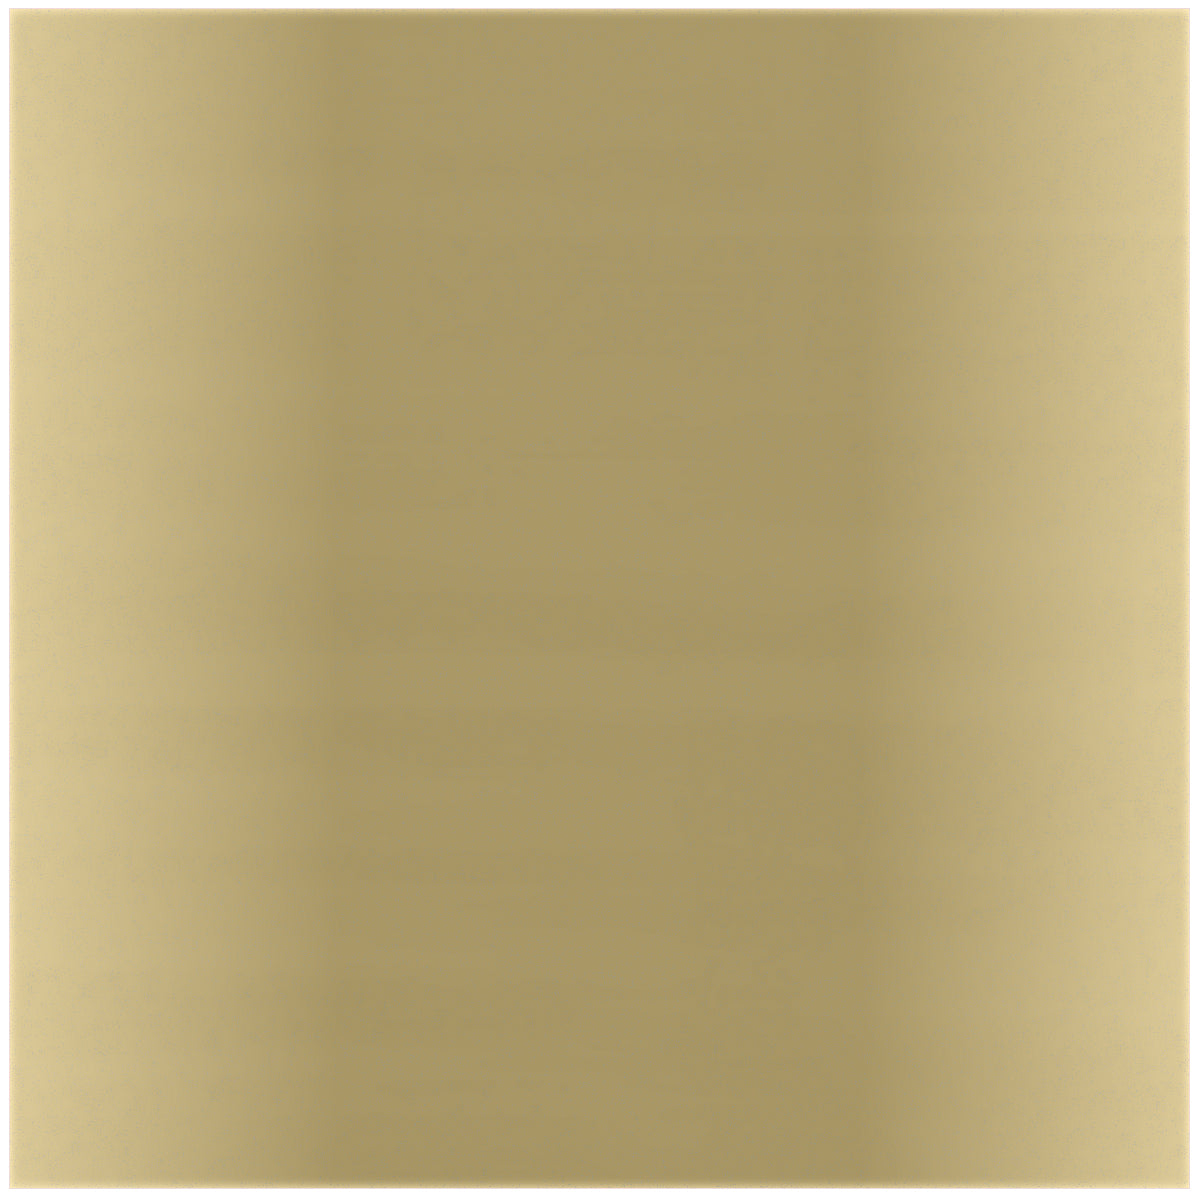 American Crafts Bazzill Foil Cardstock, Gold - 15 count